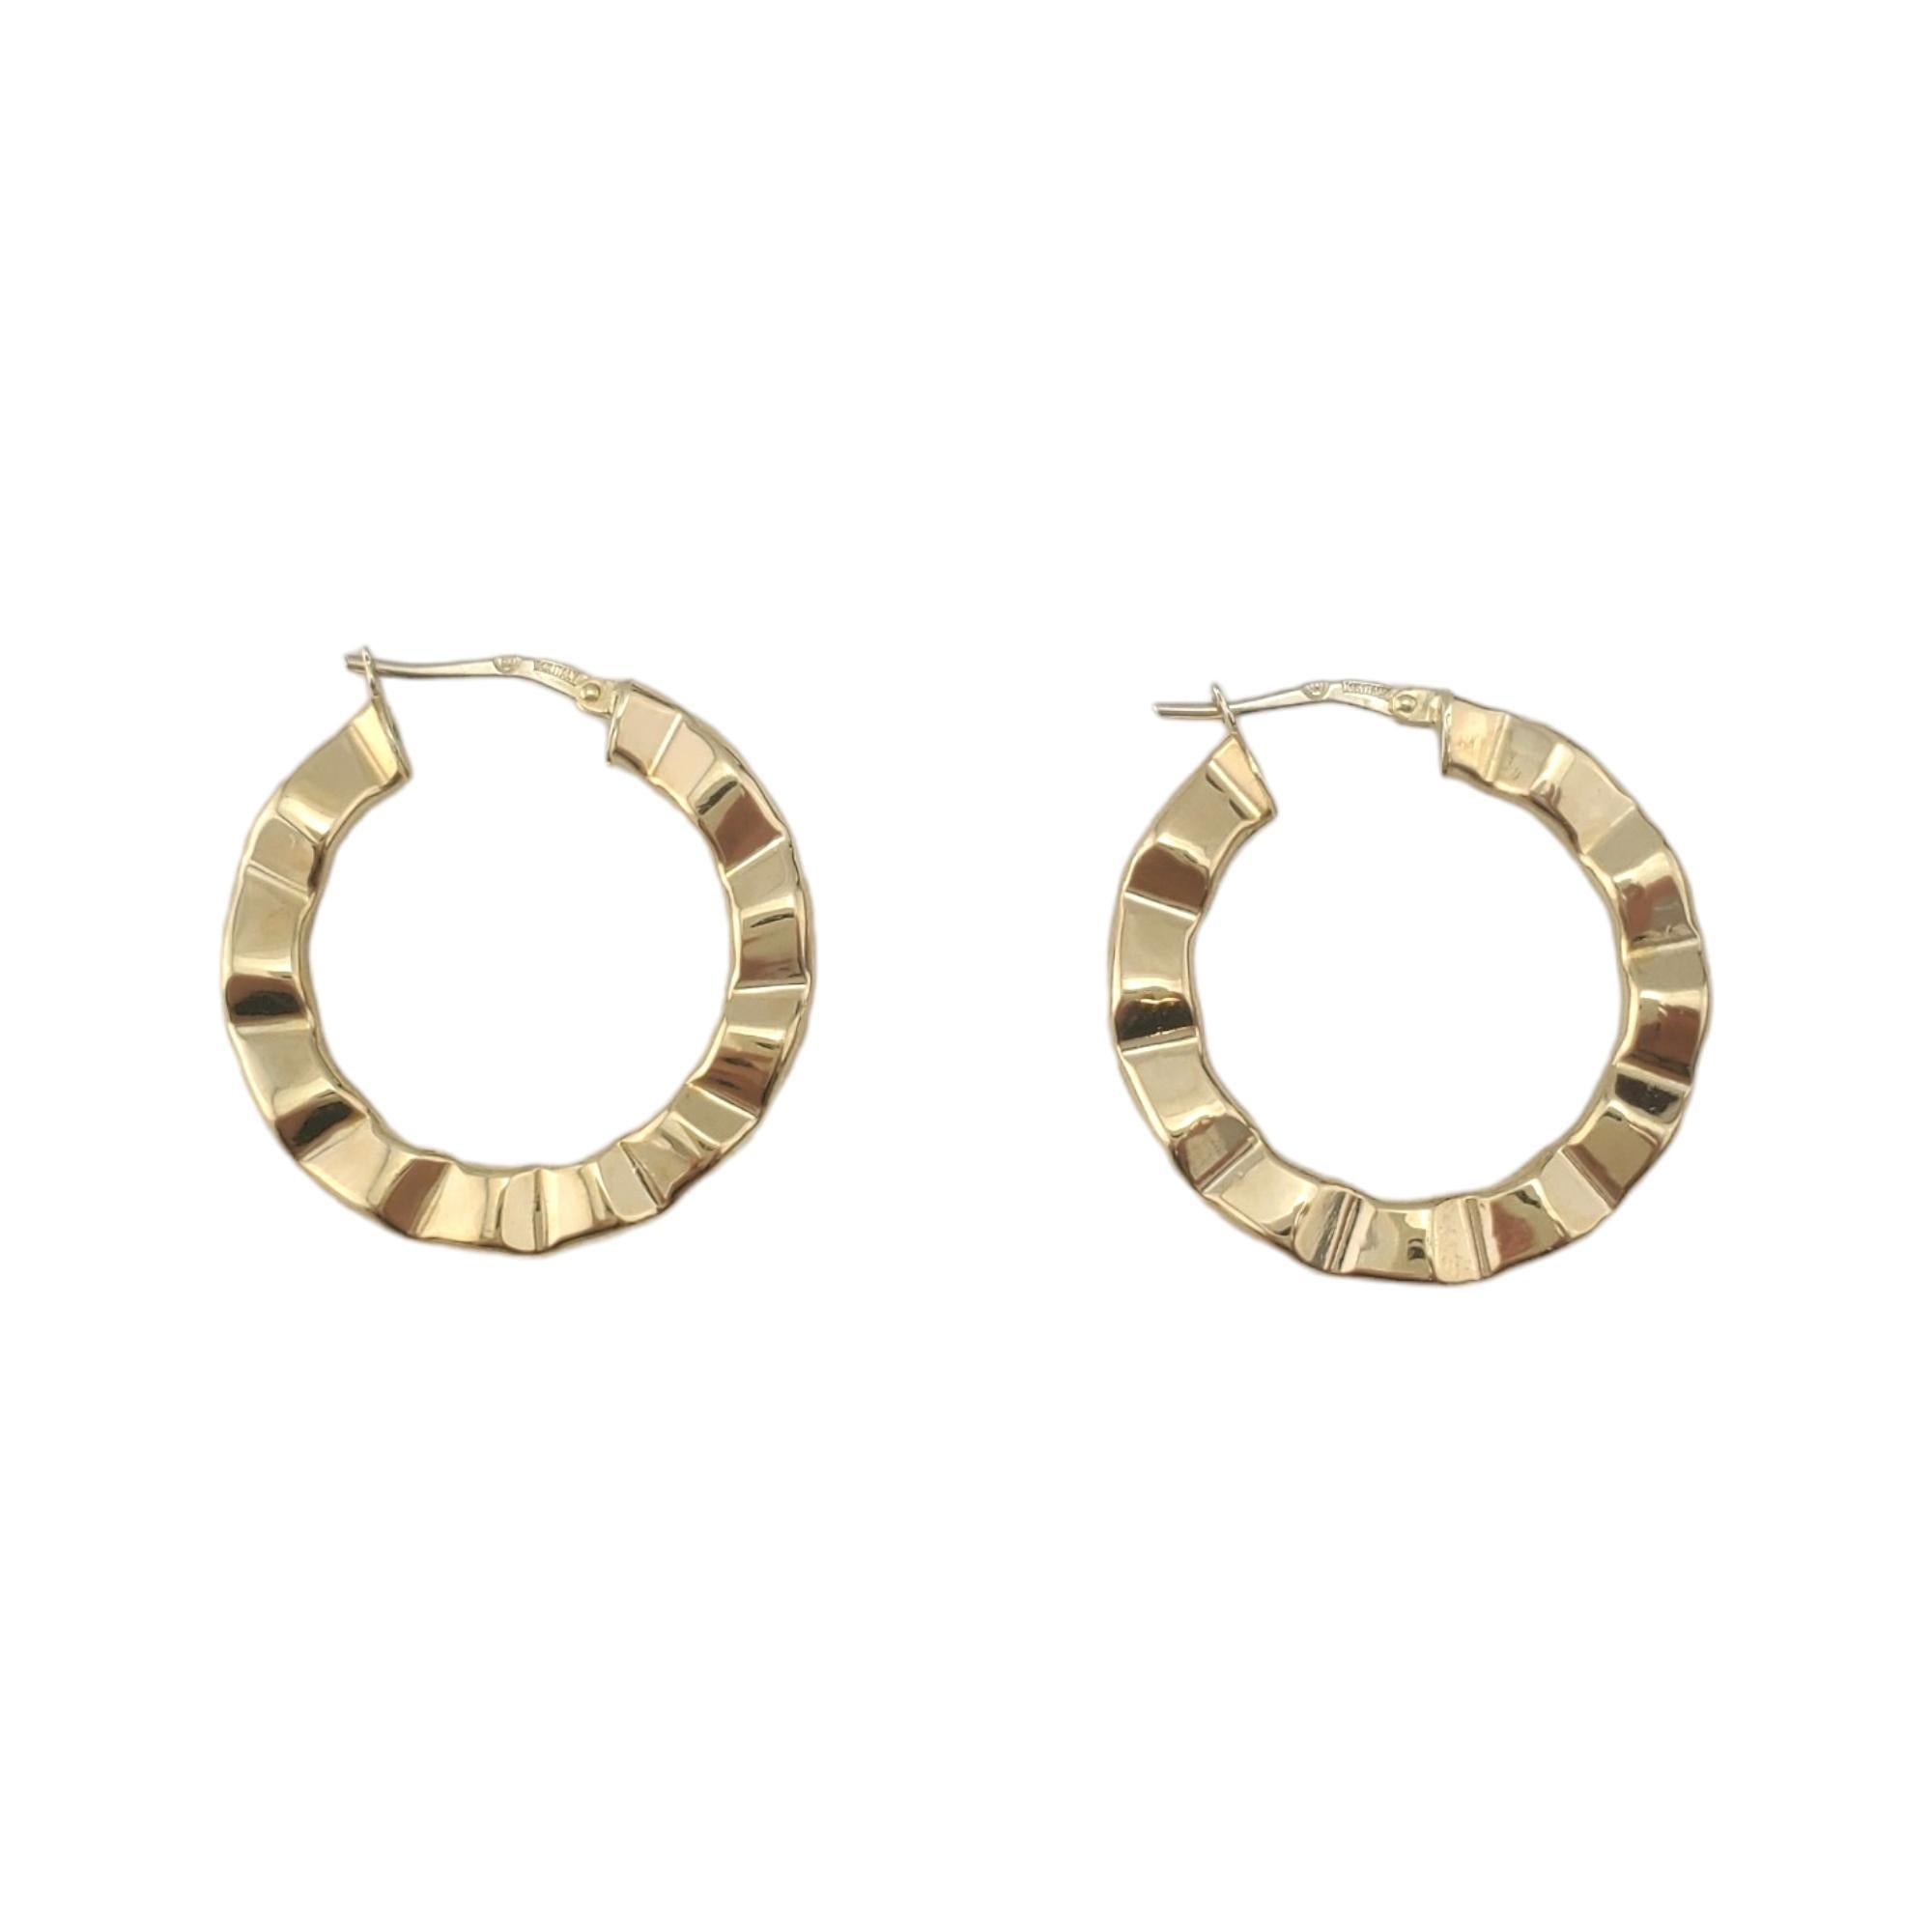 14K Yellow Gold Hoop Earrings with Crimped Wavy Design

These lovely hoop earrings feature a crimped design in 14K yellow gold.

Hallmark: 14K Italy

Weight: 3.1 g/ 2.0 dwt.

Size: 25.3 mm X 2.3 mm X 3.8 mm

Very good condition, professionally